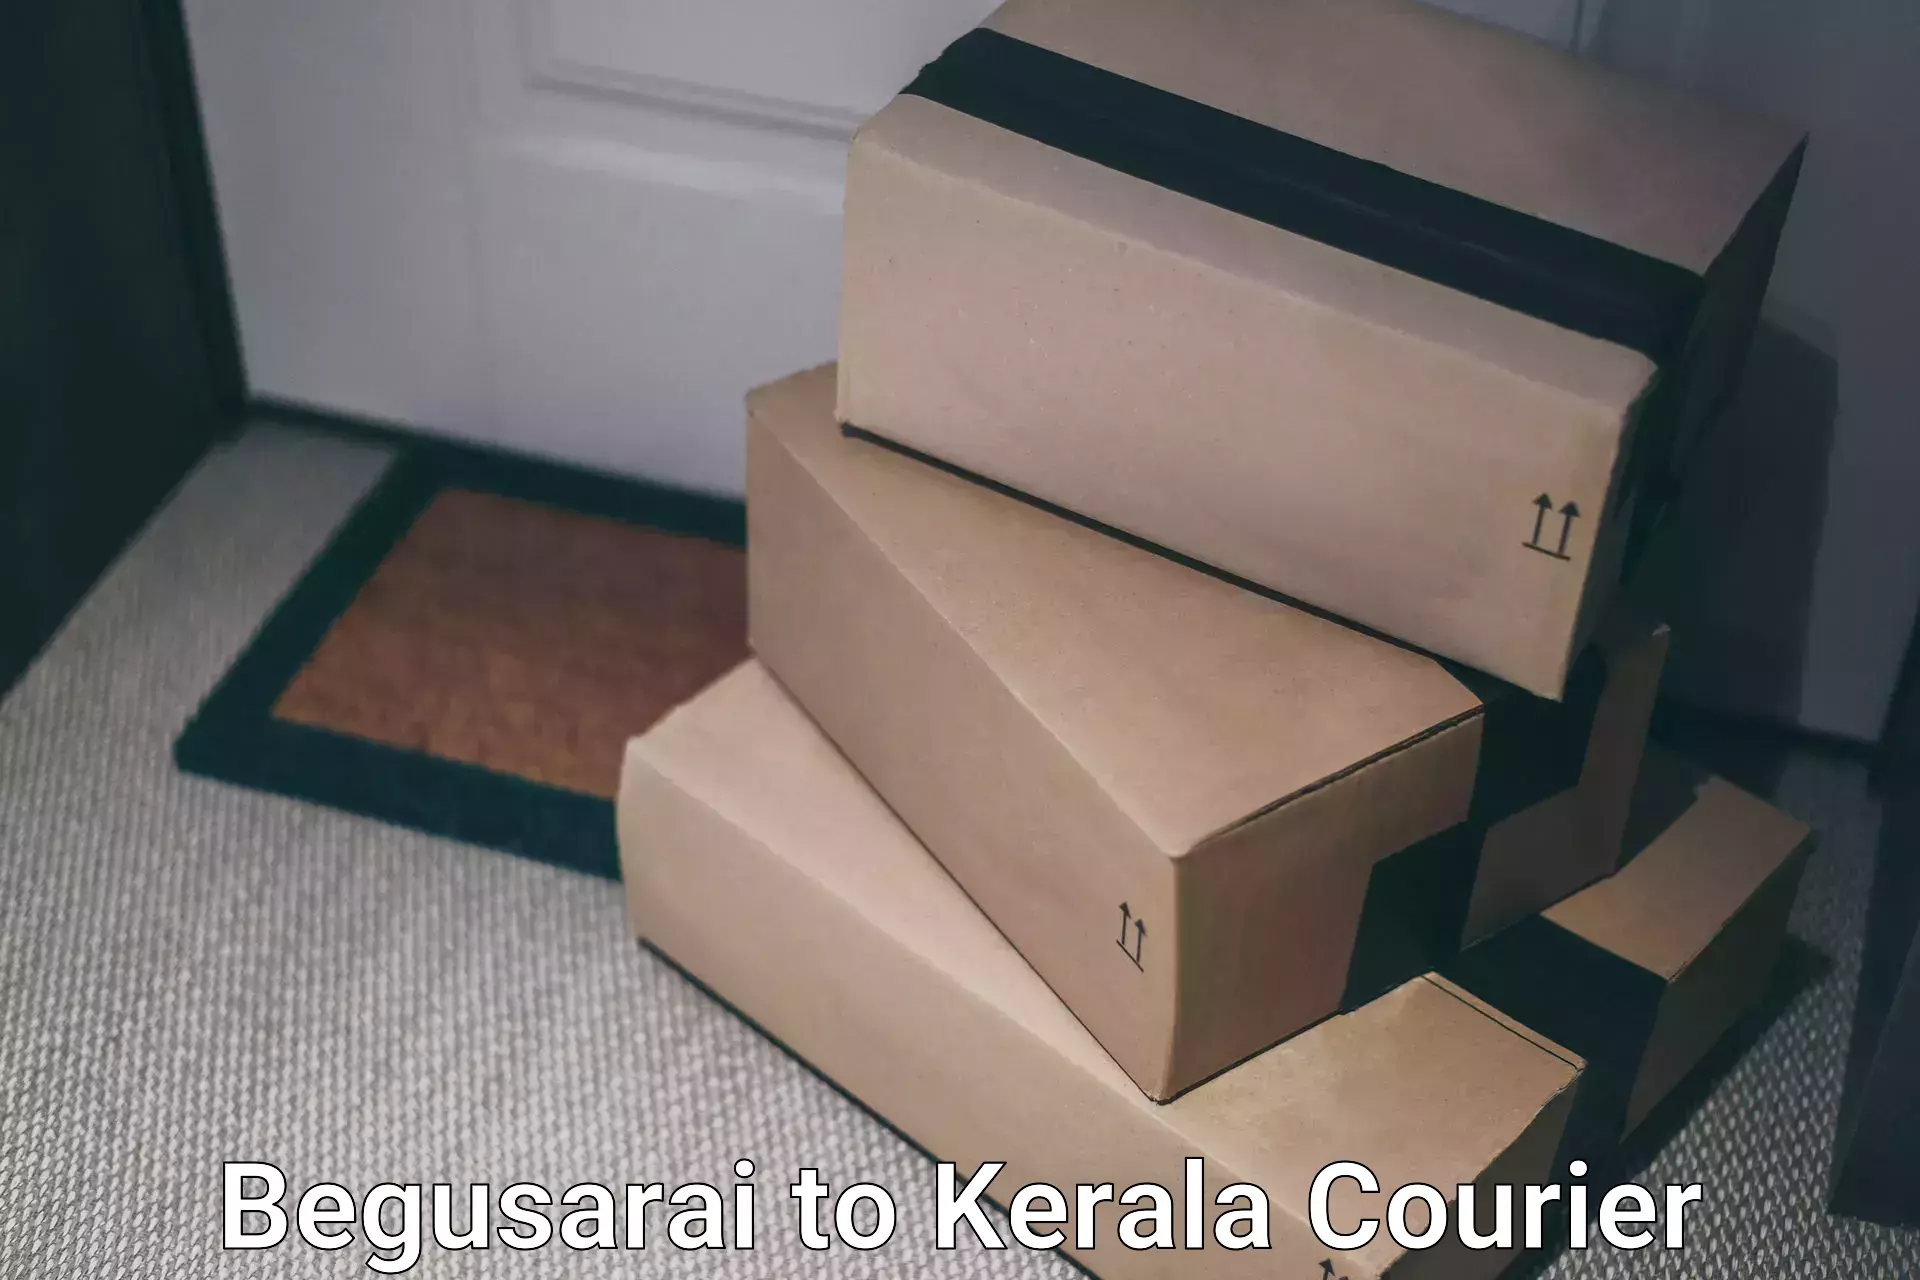 Customizable delivery plans Begusarai to Kerala